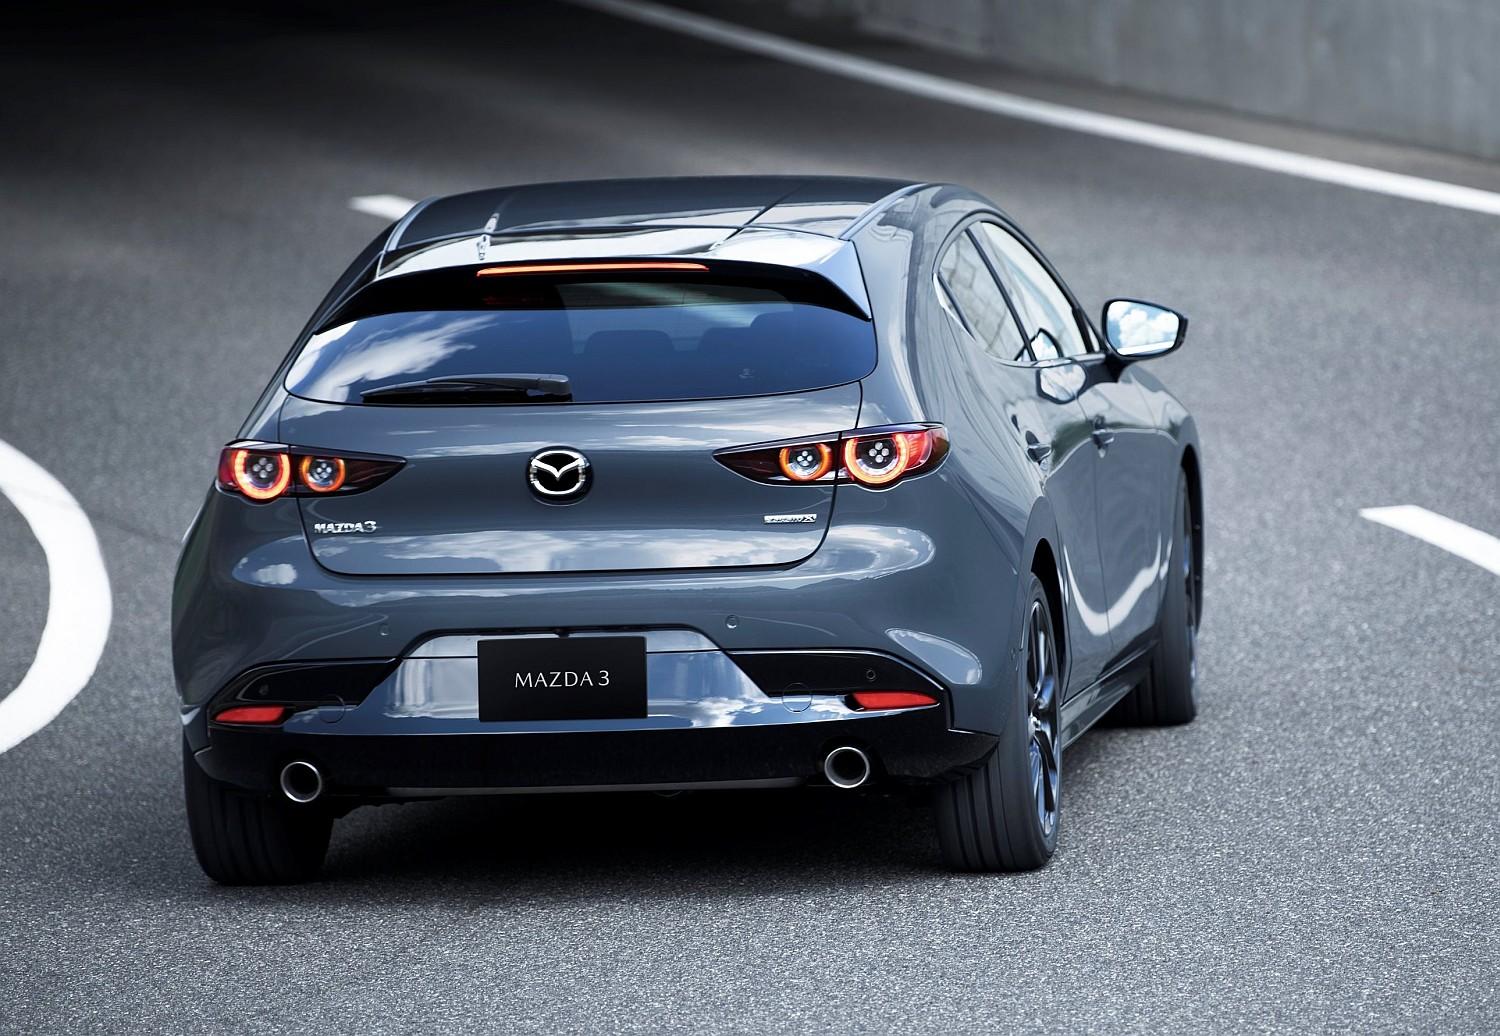 11_All-New-Mazda3_5HB_EXT_Polymetal-Gray-Metallic_lowres